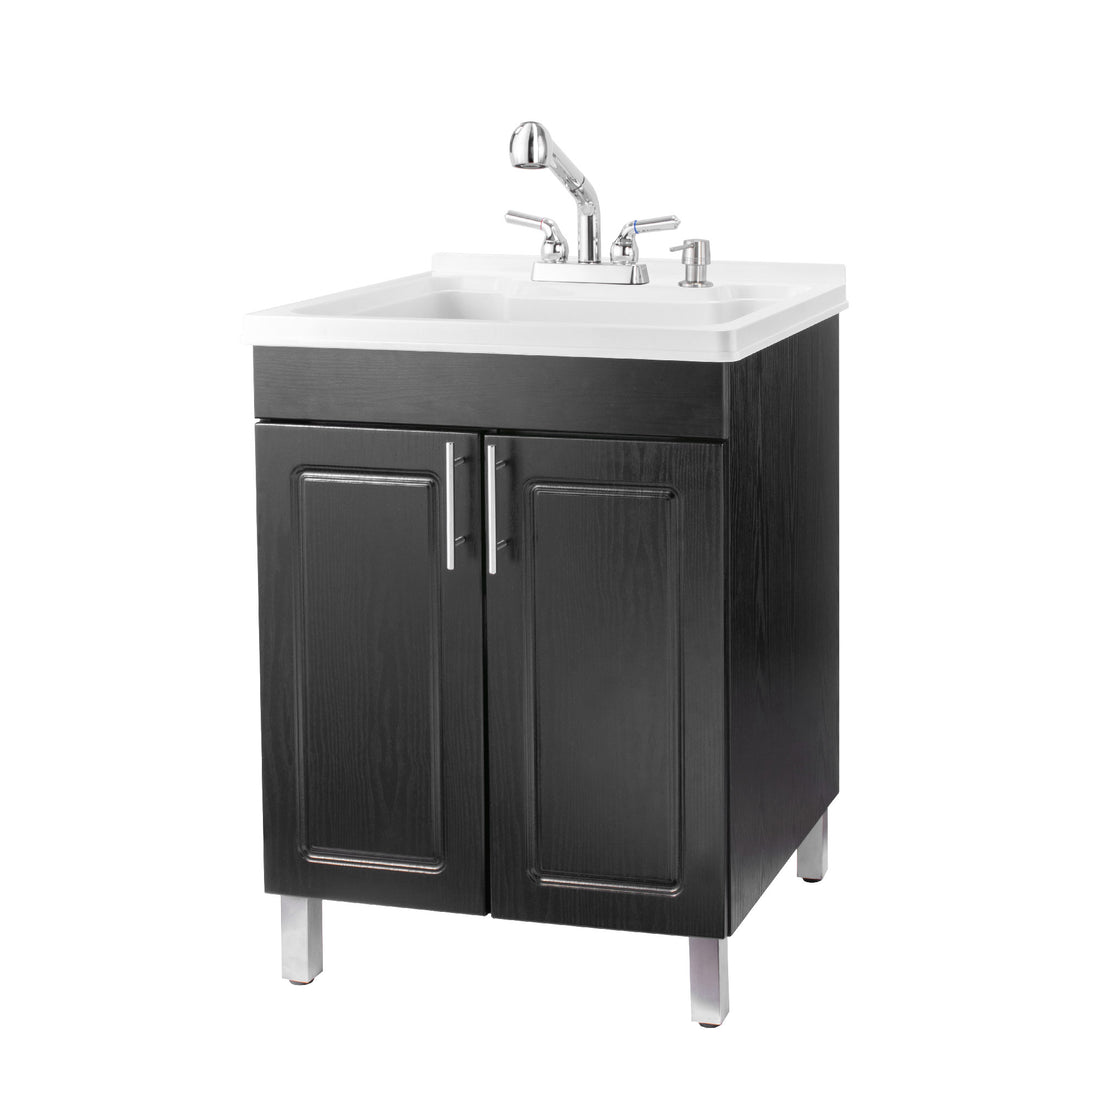 Tehila Black Vanity Cabinet and White Utility Sink with Chrome Finish Pull-Out Faucet - Utility sinks vanites Tehila